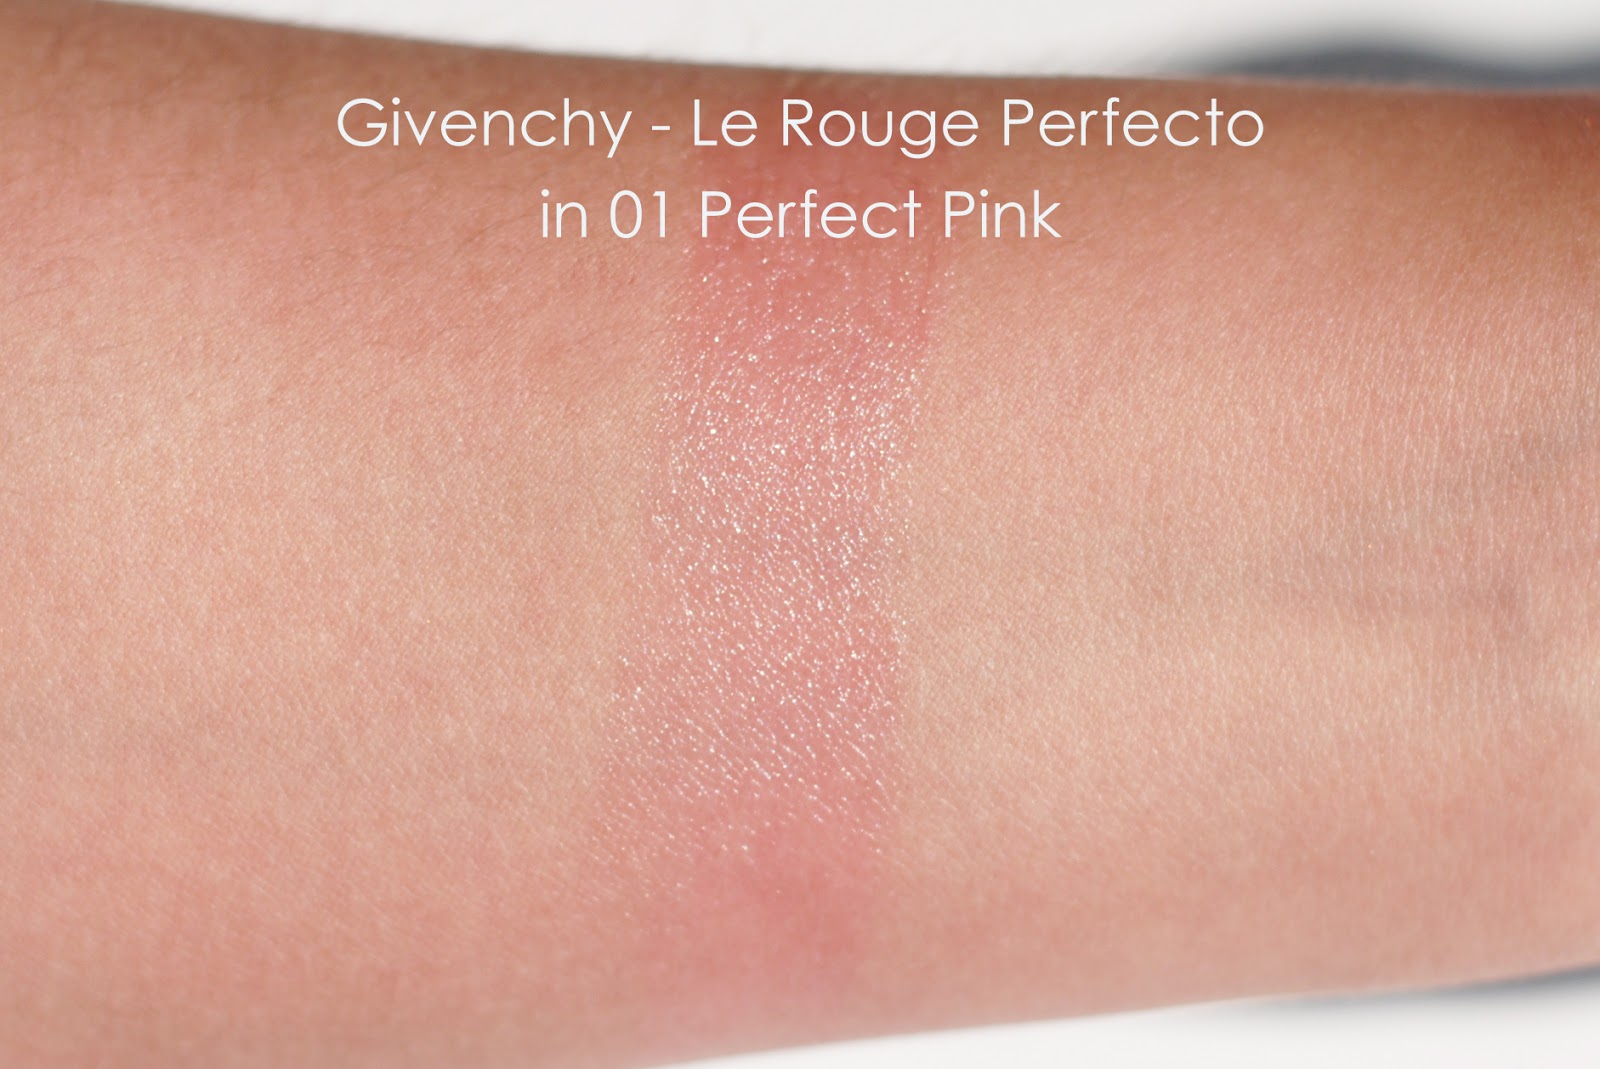 le rouge perfecto givenchy